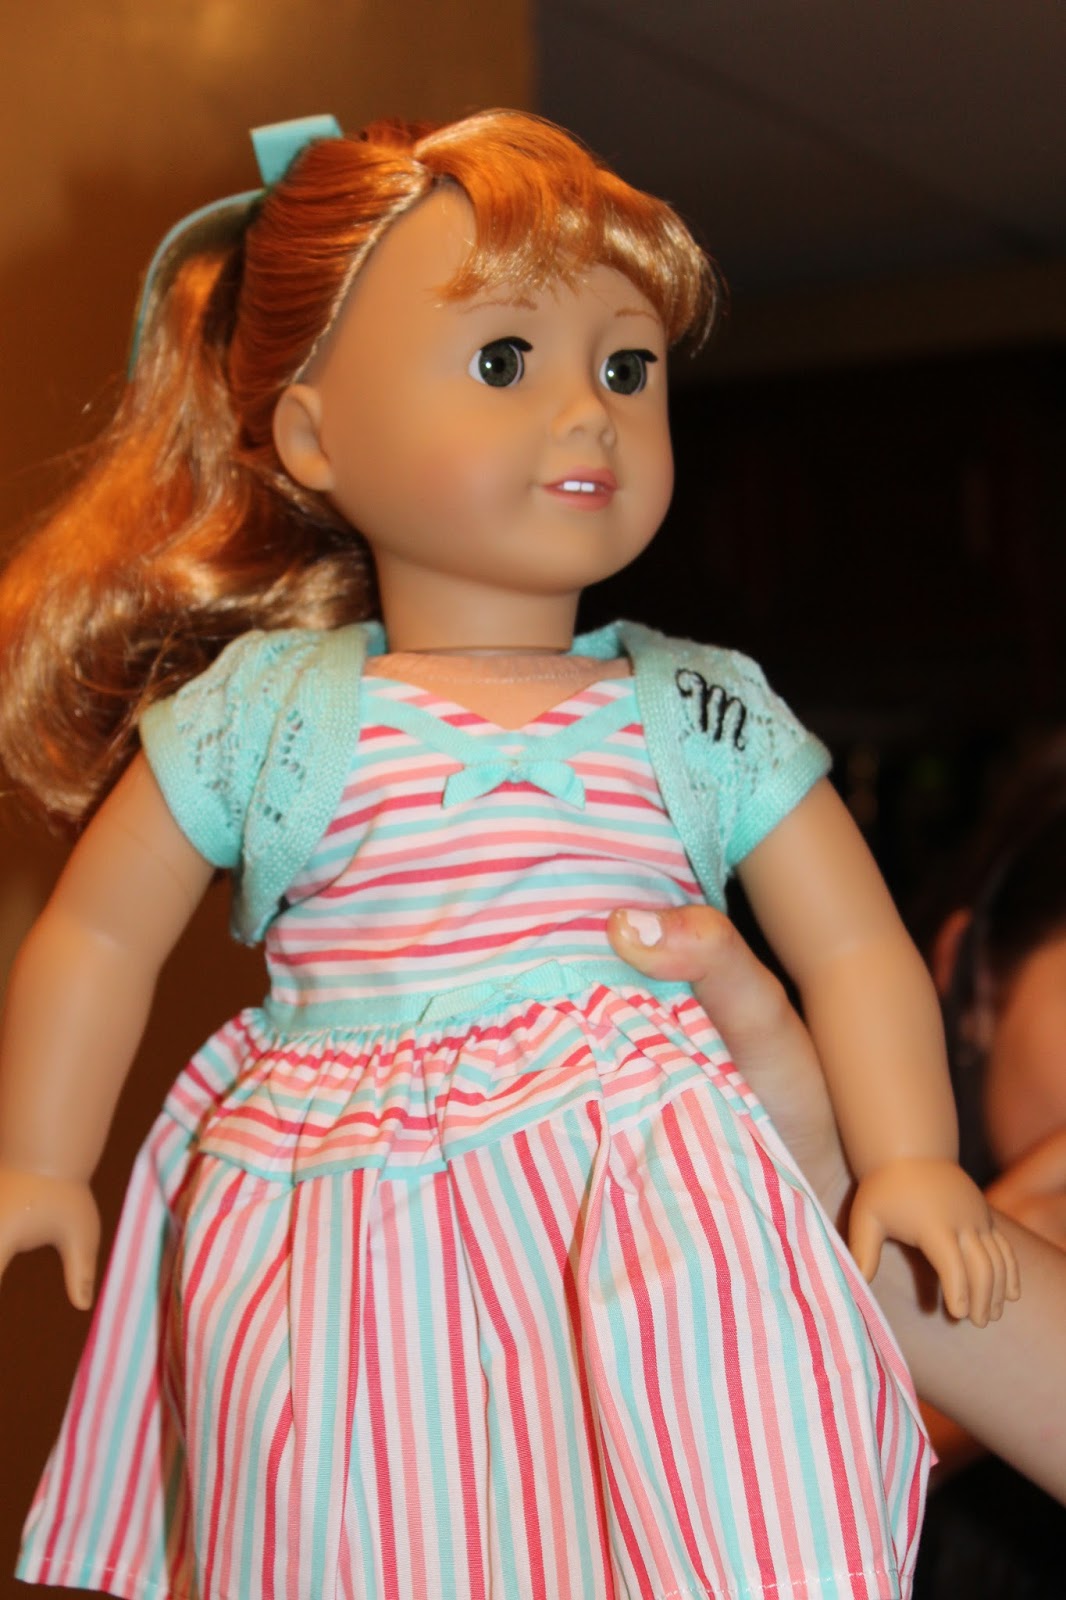 American Girl Sisters: Opening and Photo Shoot of Maryellen!